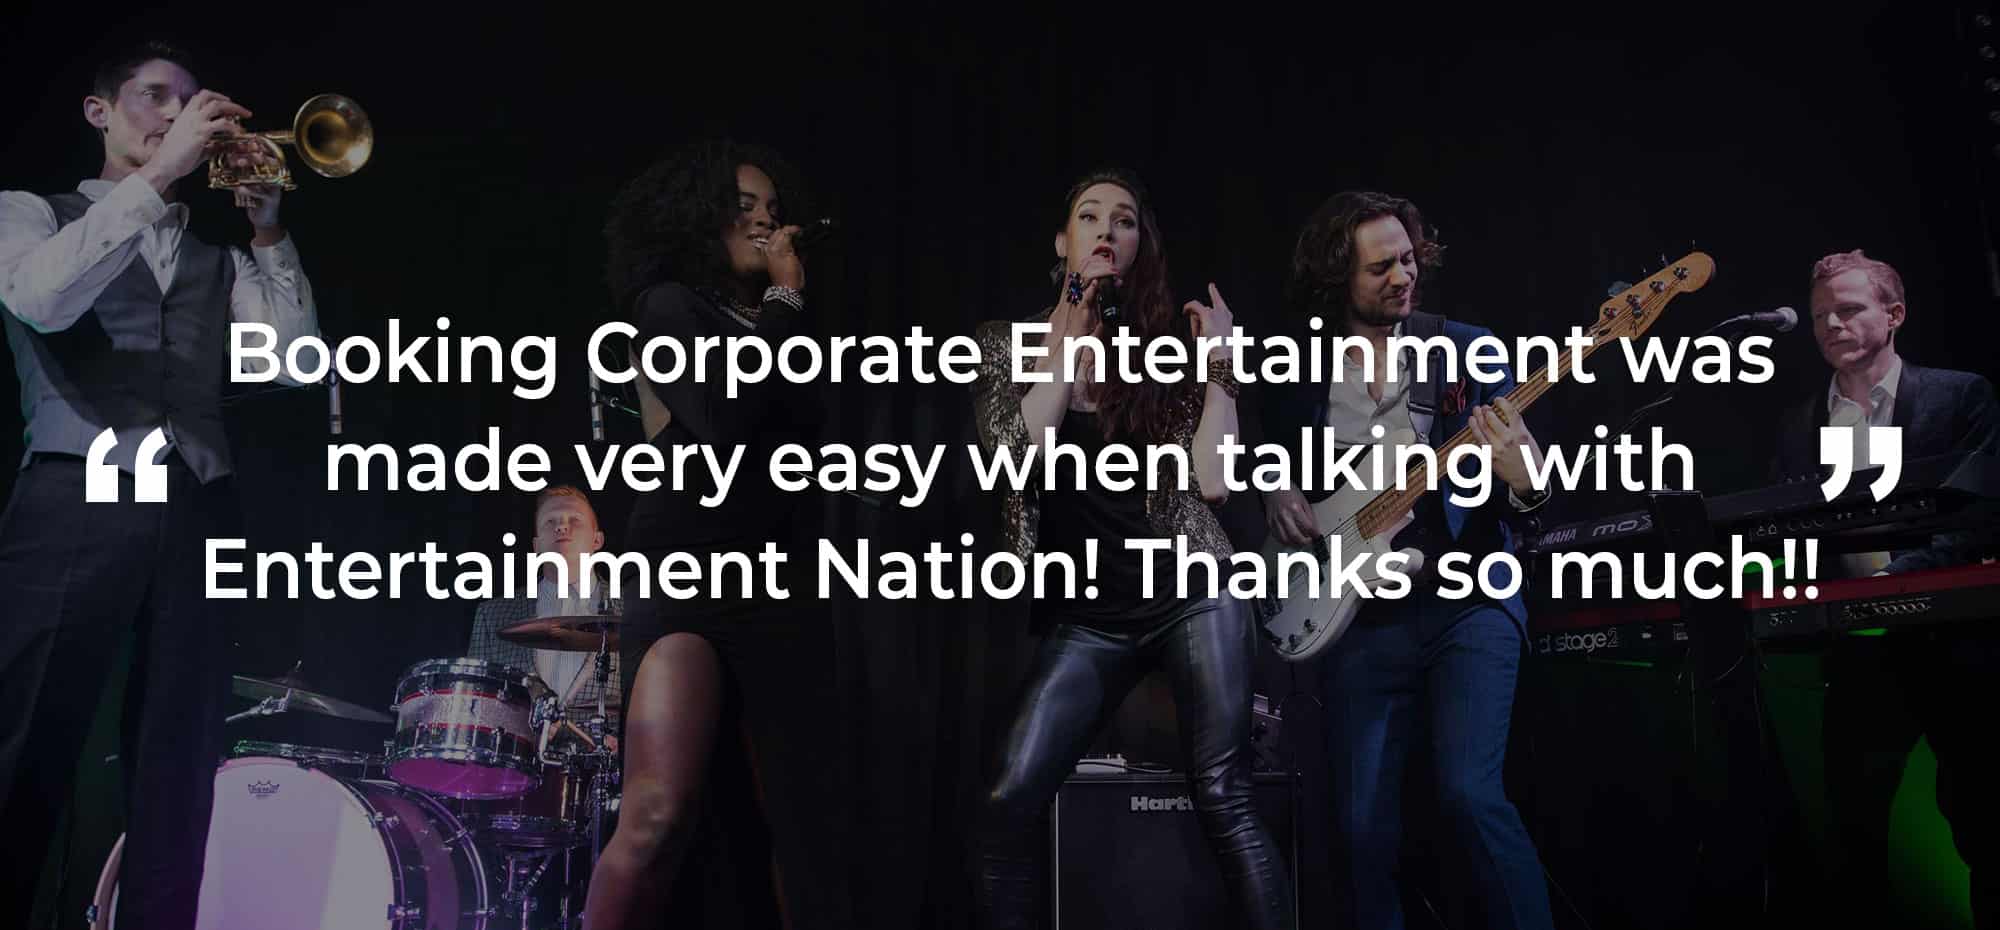 Review of Corporate Entertainment Newcastle upon Tyne